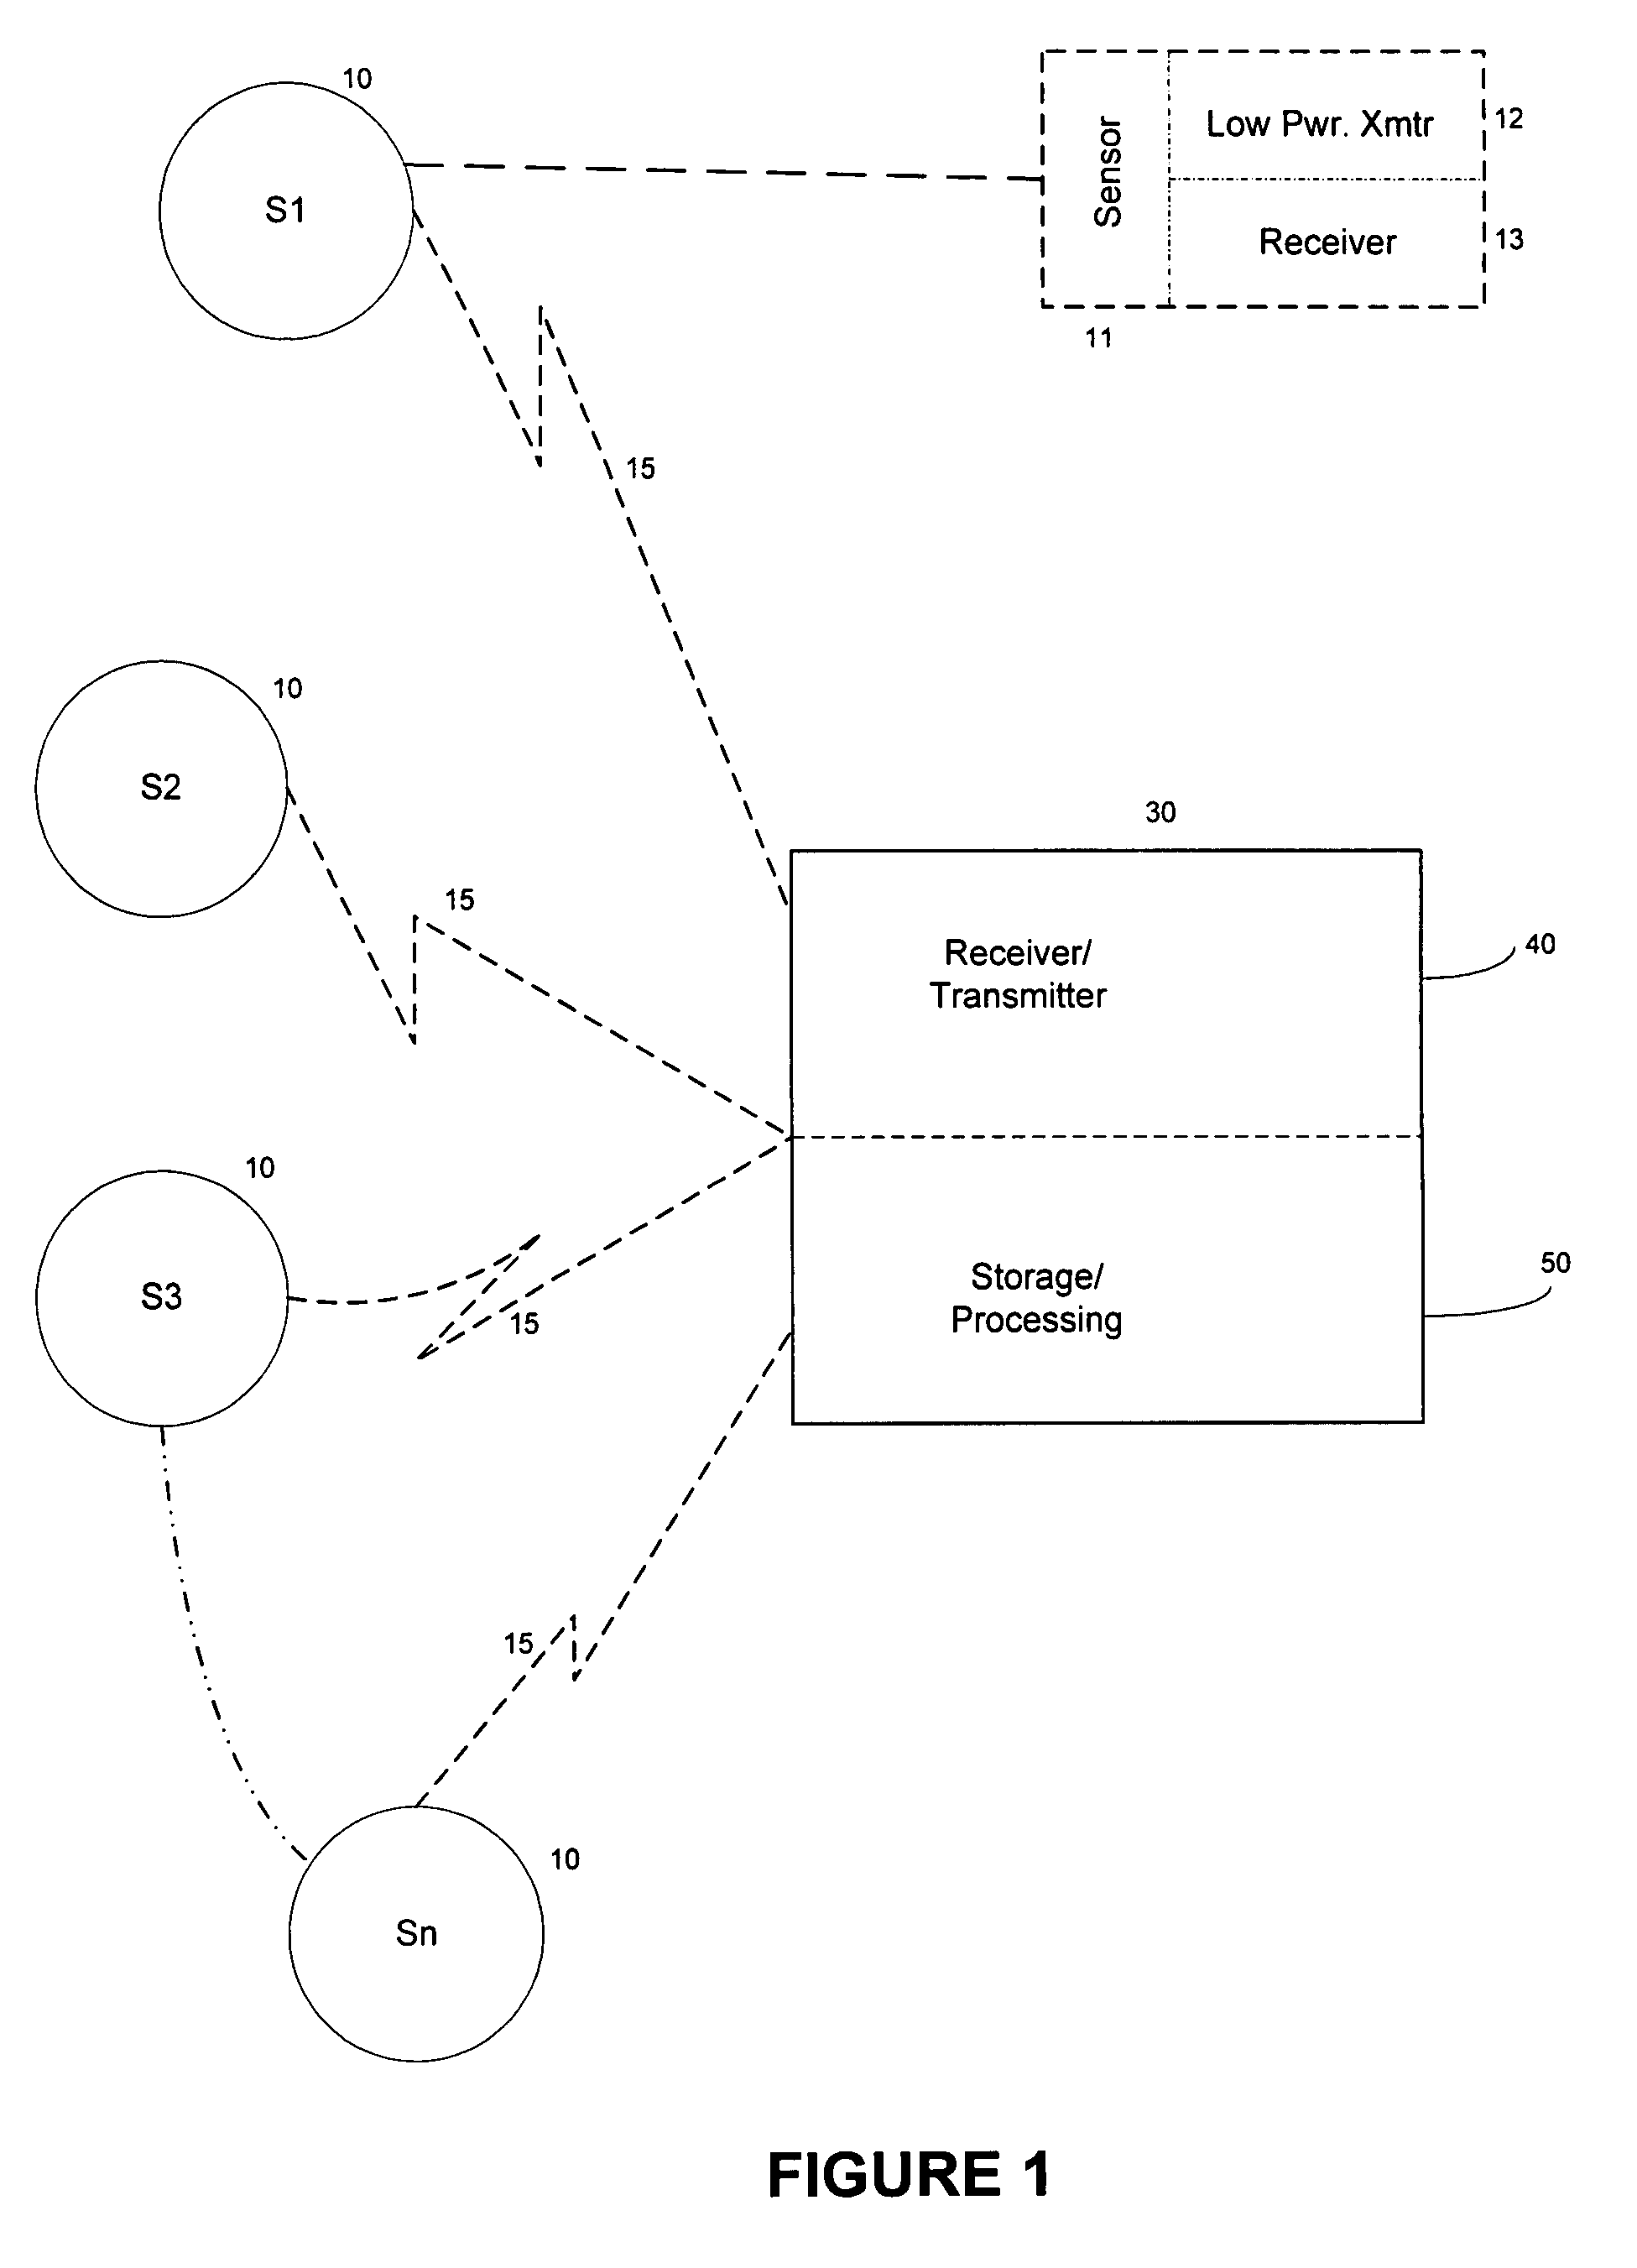 System and method for coherent communication in a network